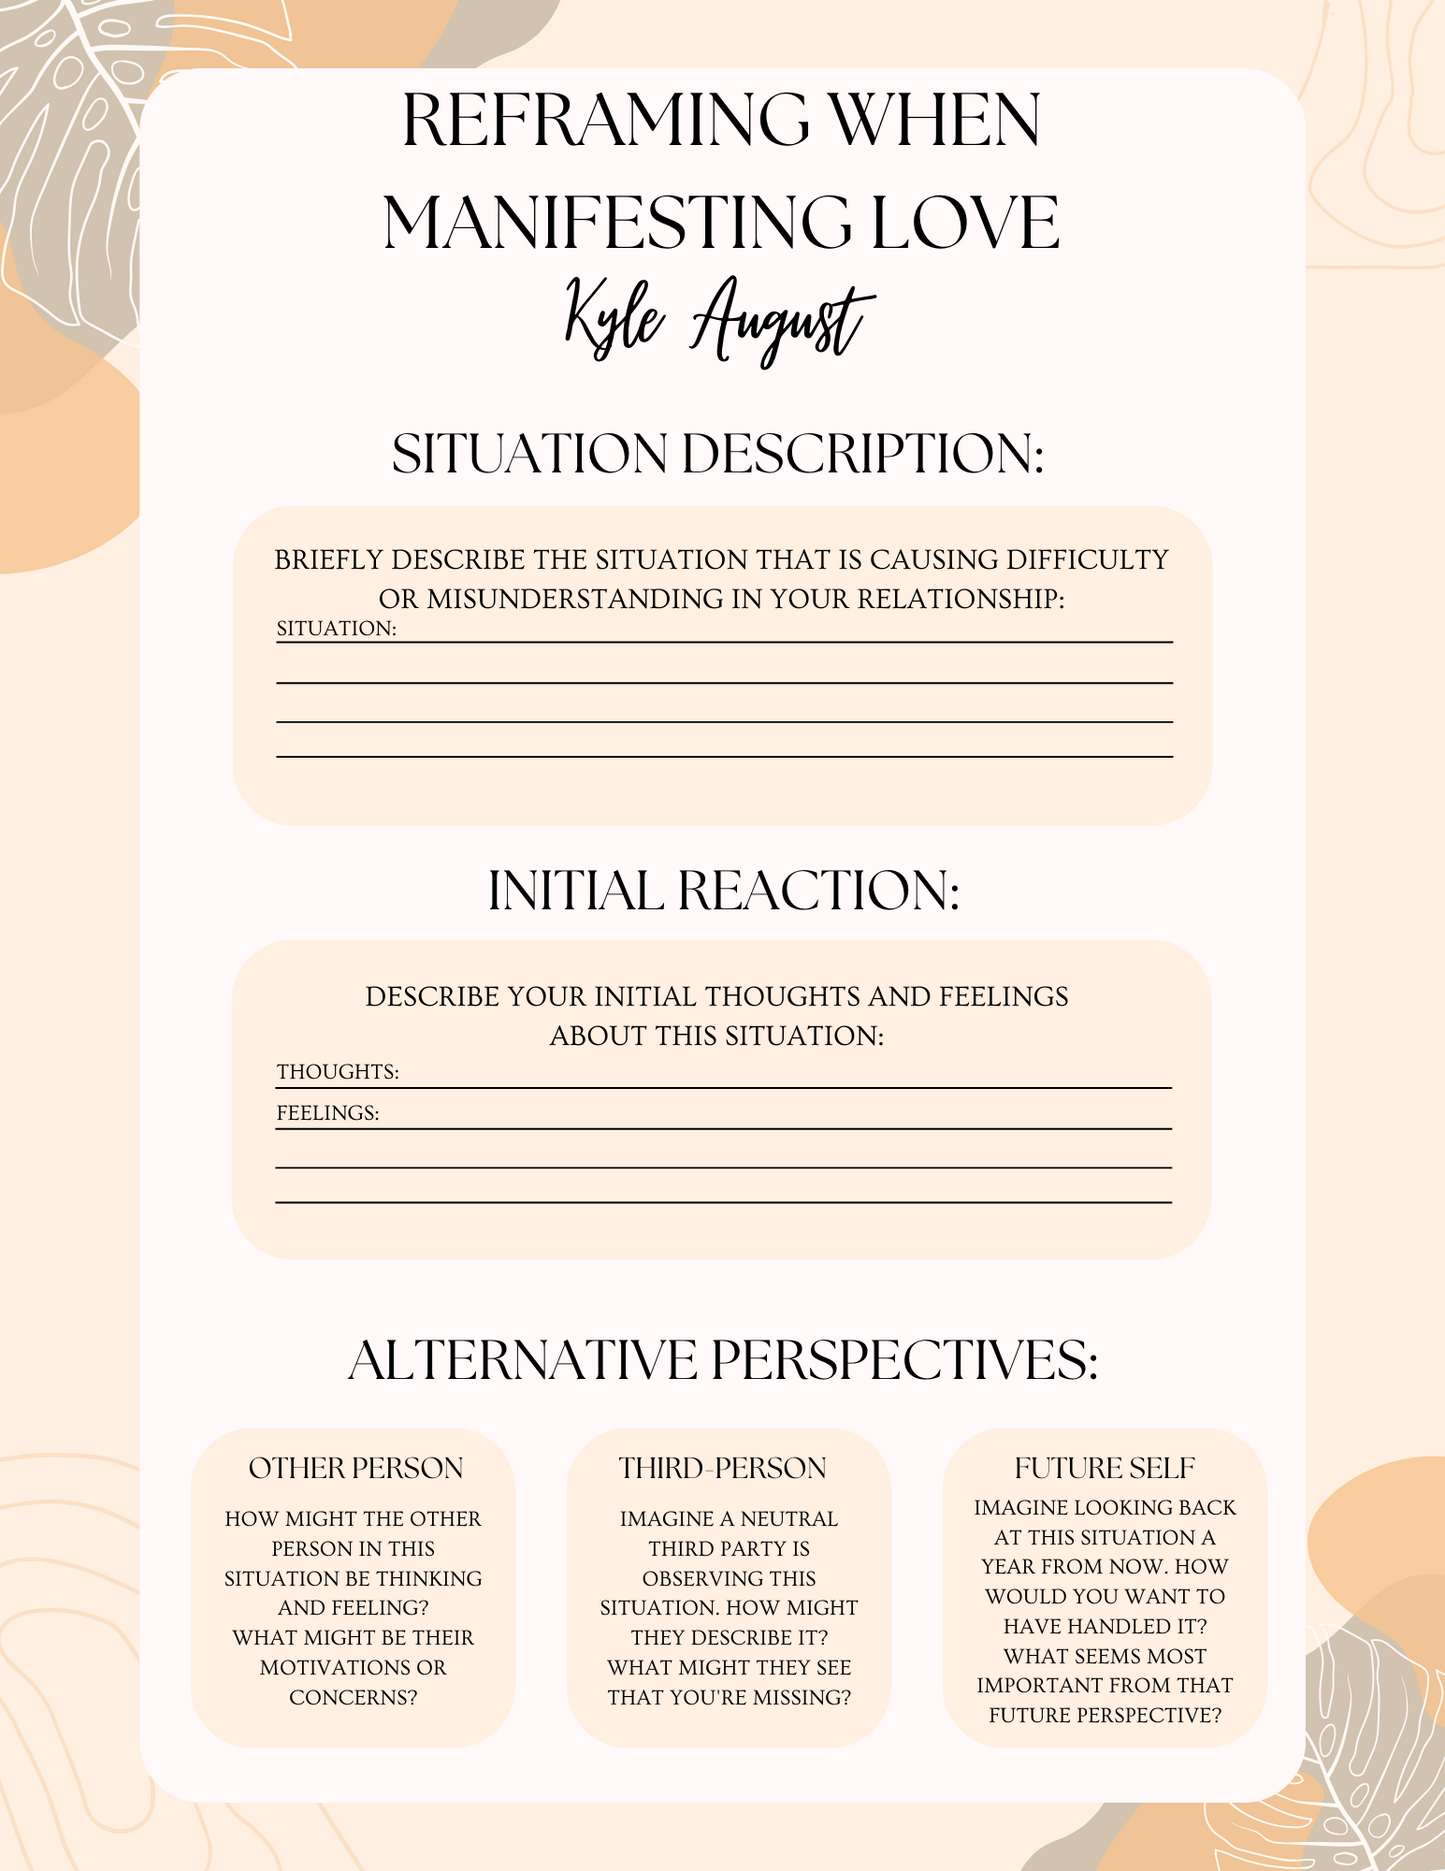 Reframing When Manifesting Love With Kyle August (WorkSheet)